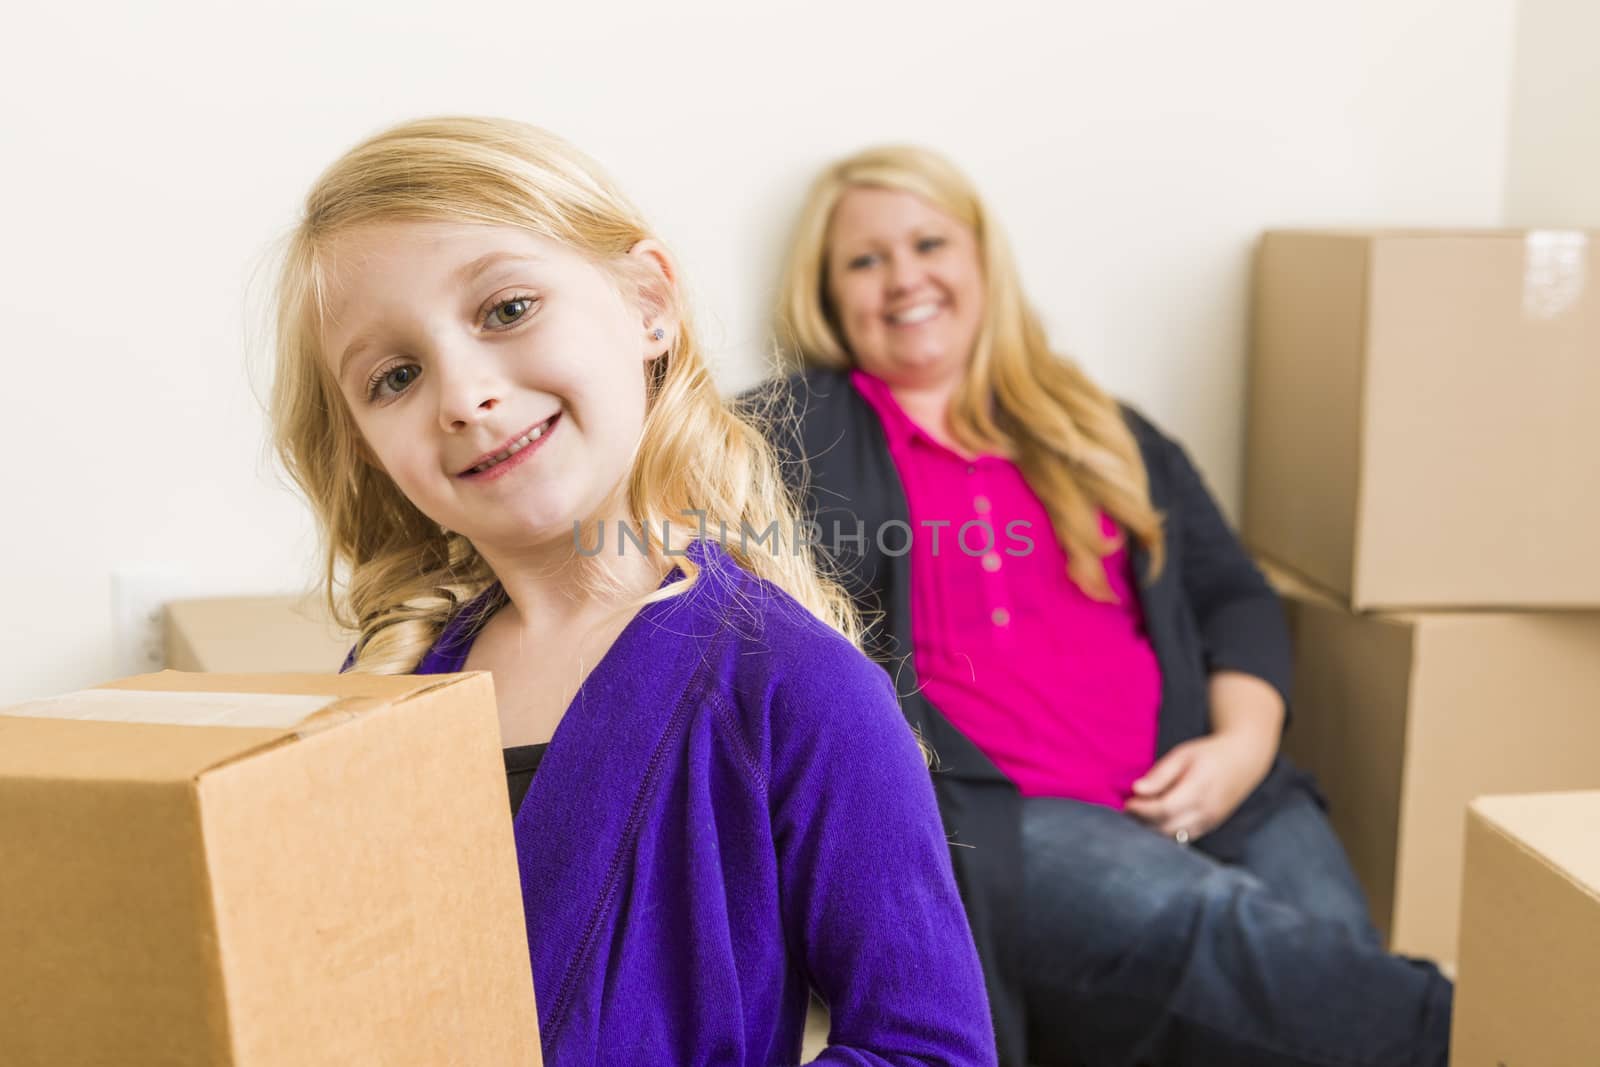 Young Mother and Daughter In Empty Room With Moving Boxes by Feverpitched